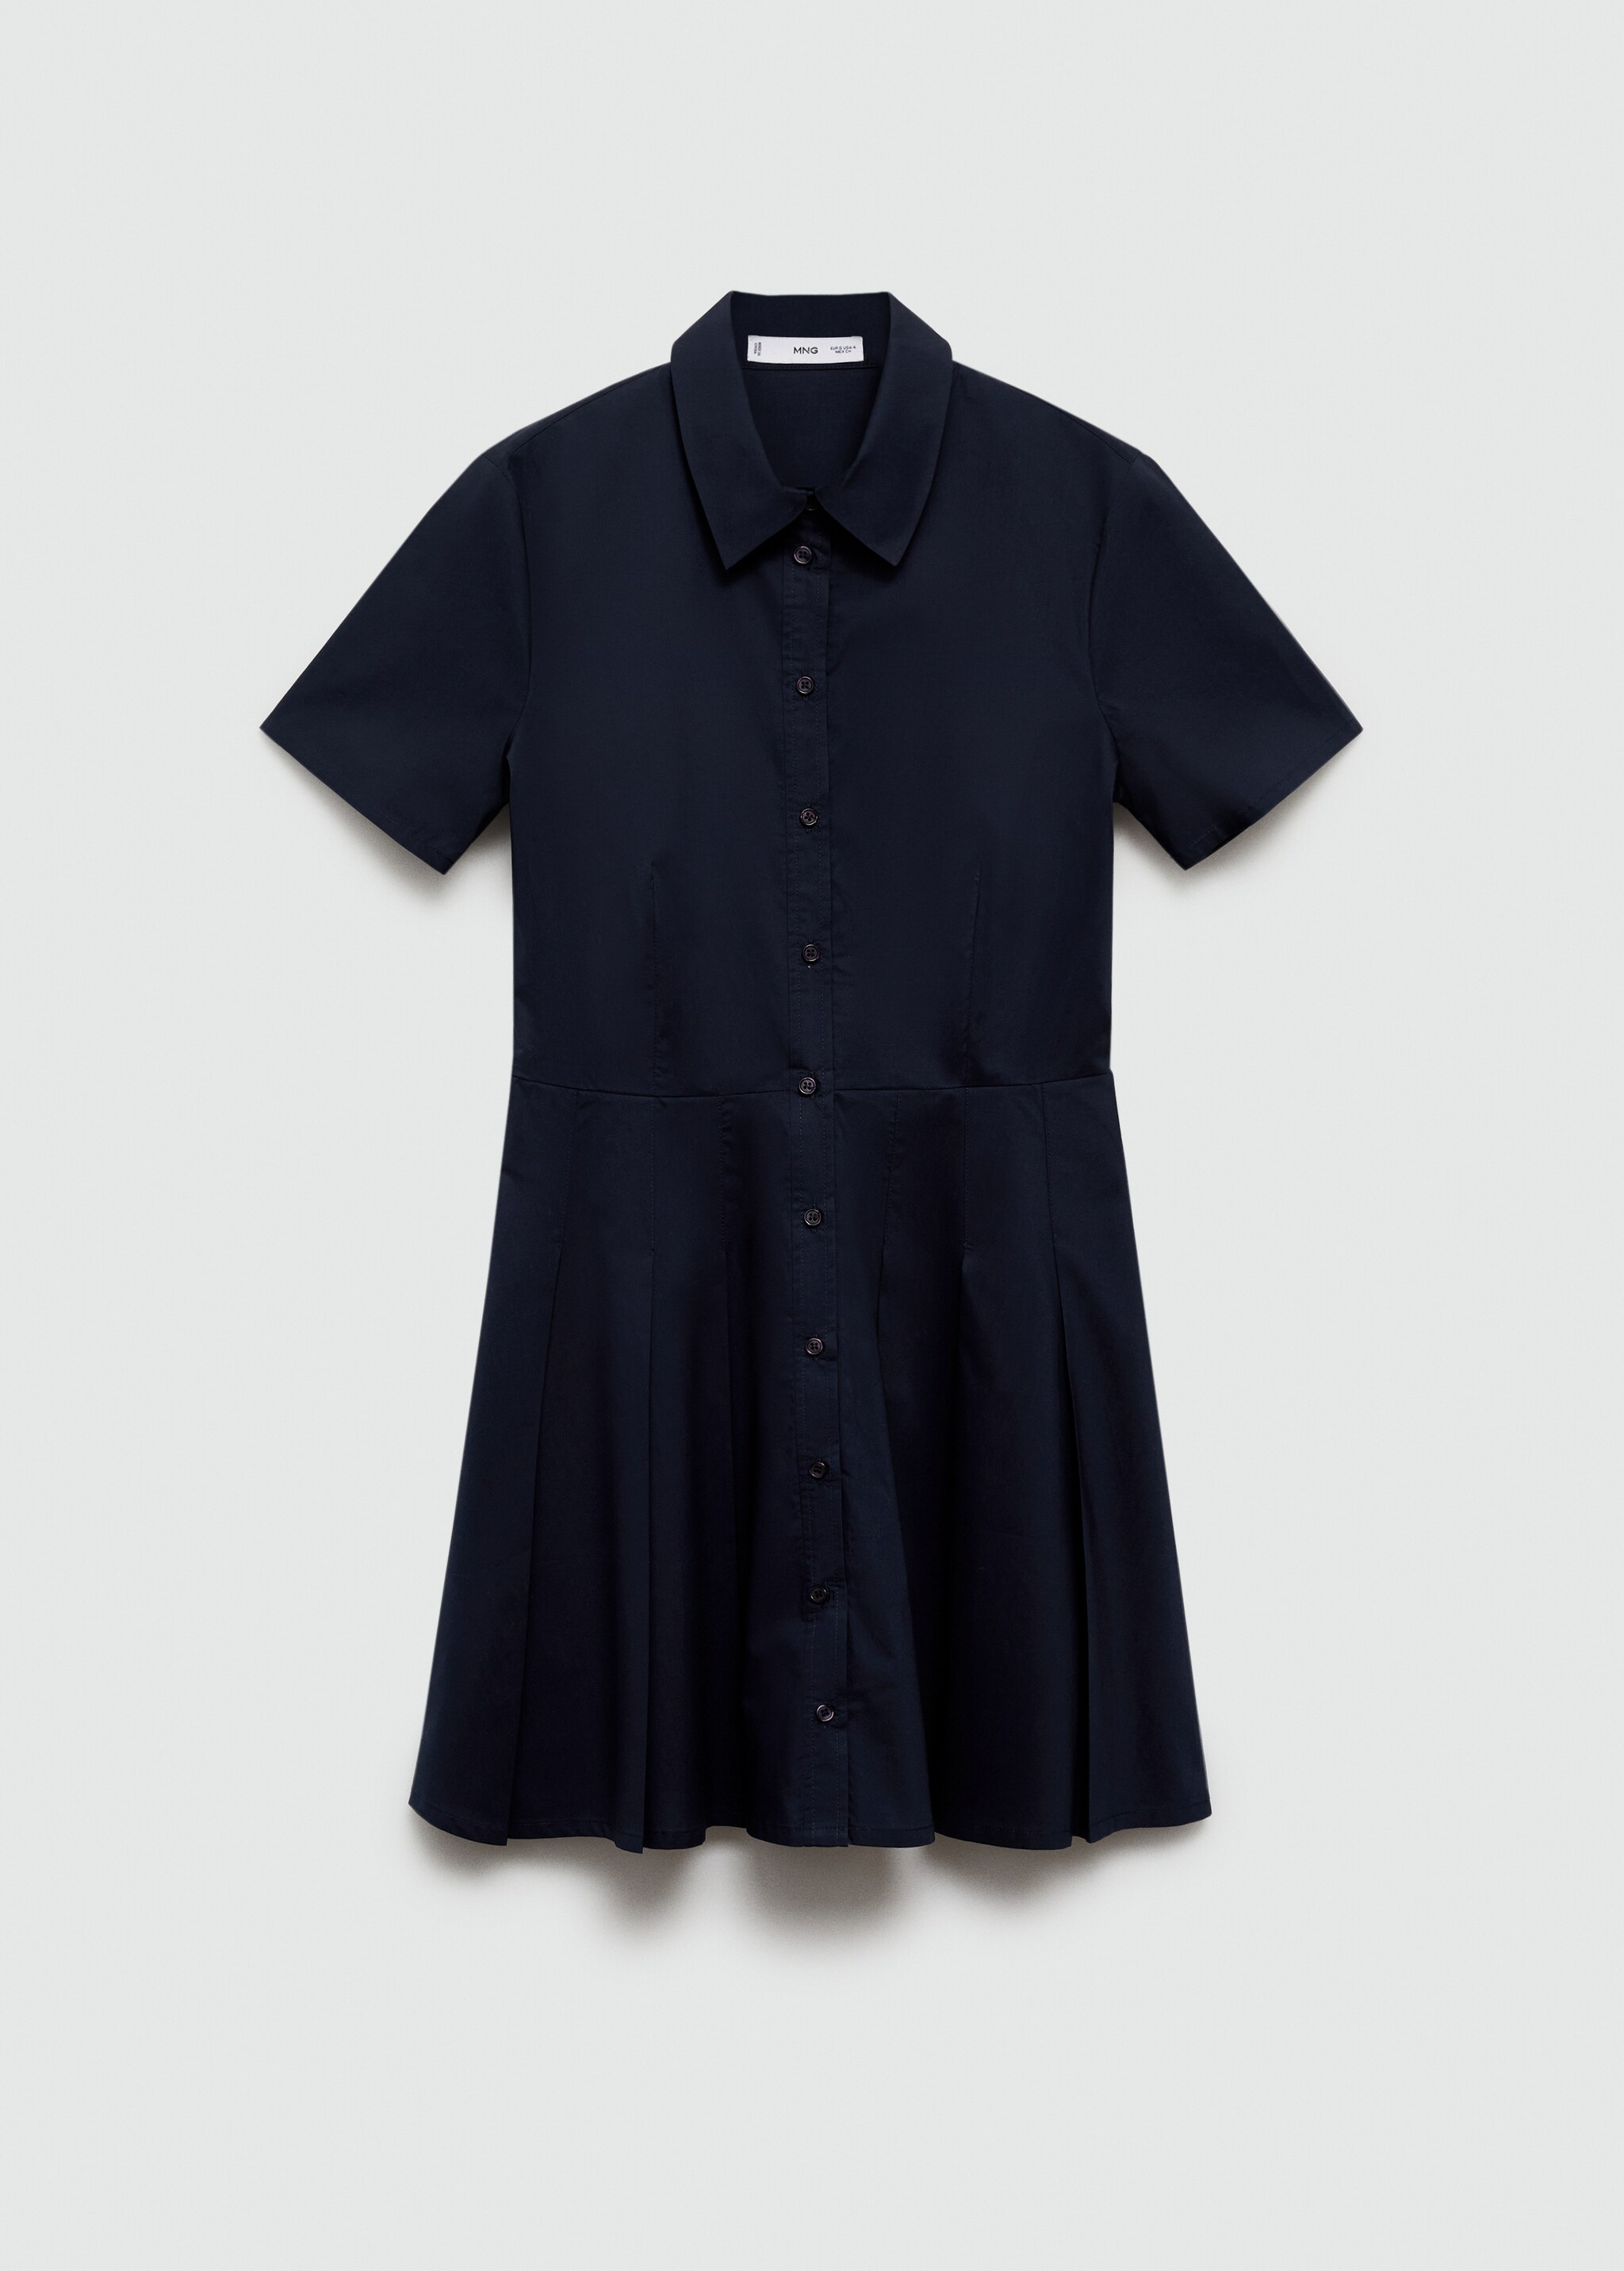 Pleated shirt dress - Article without model